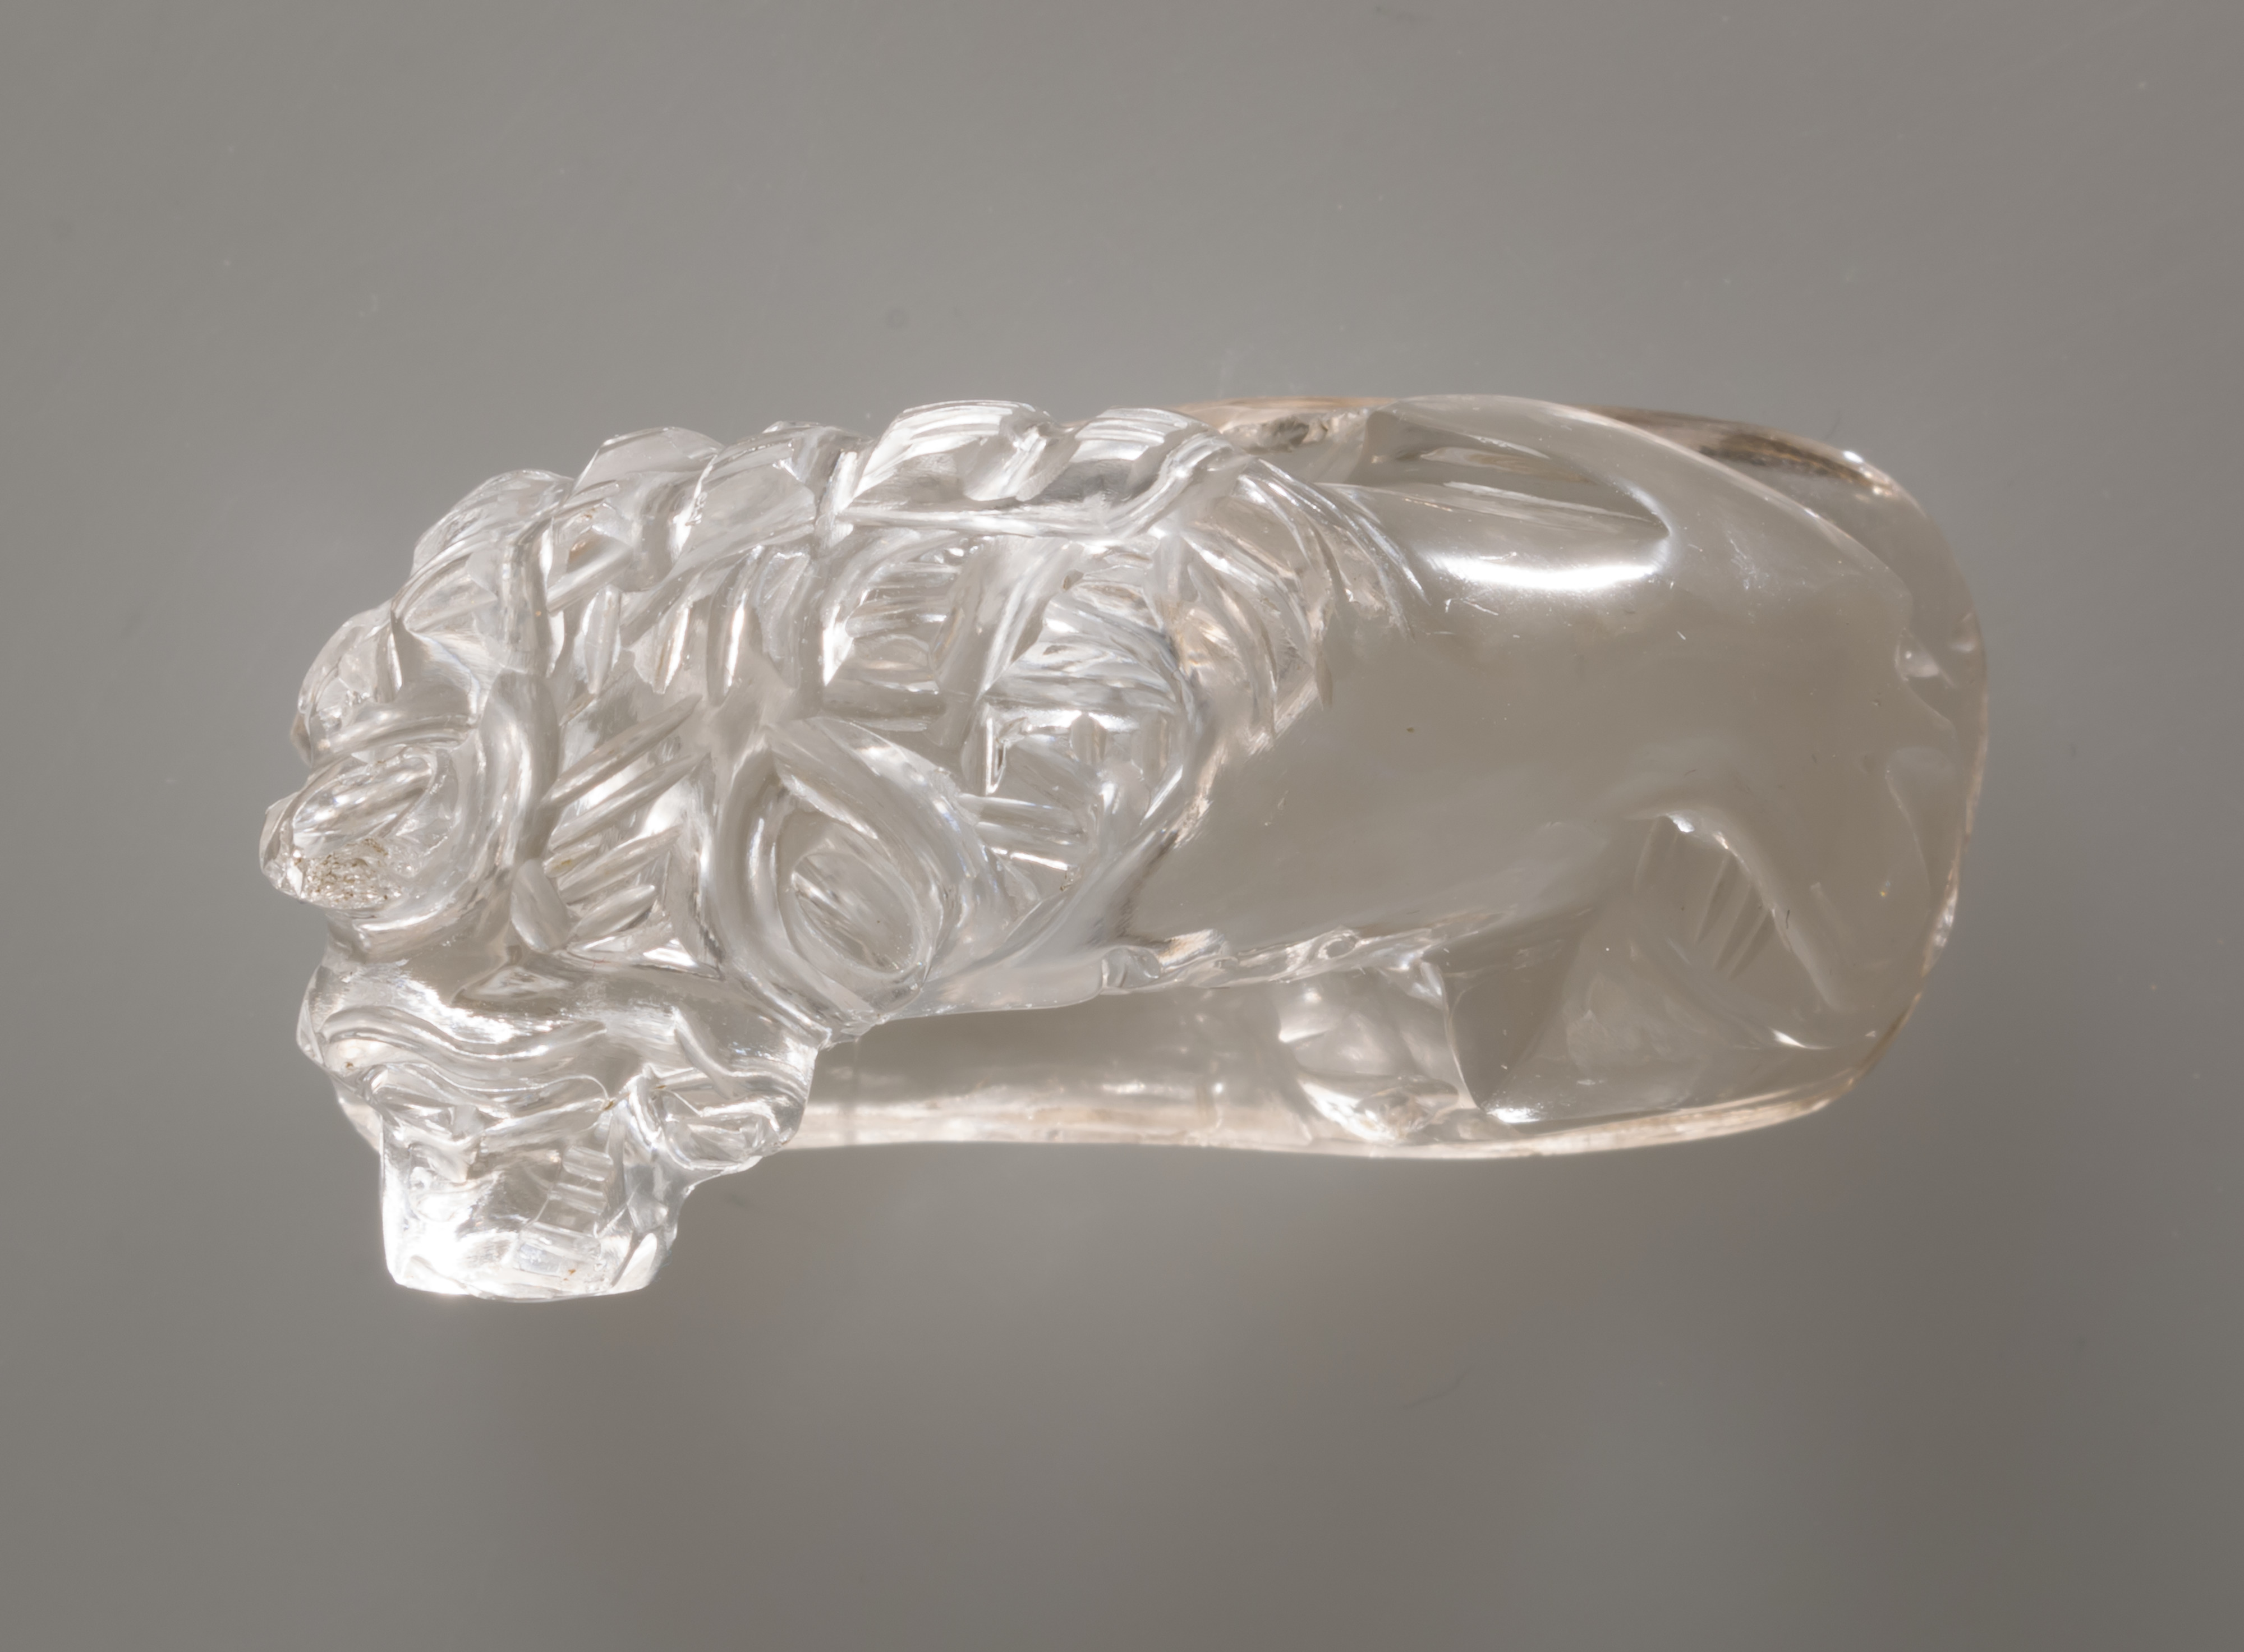 Rock crystal Statuette of a Lion | North African (Carthage) | The ...